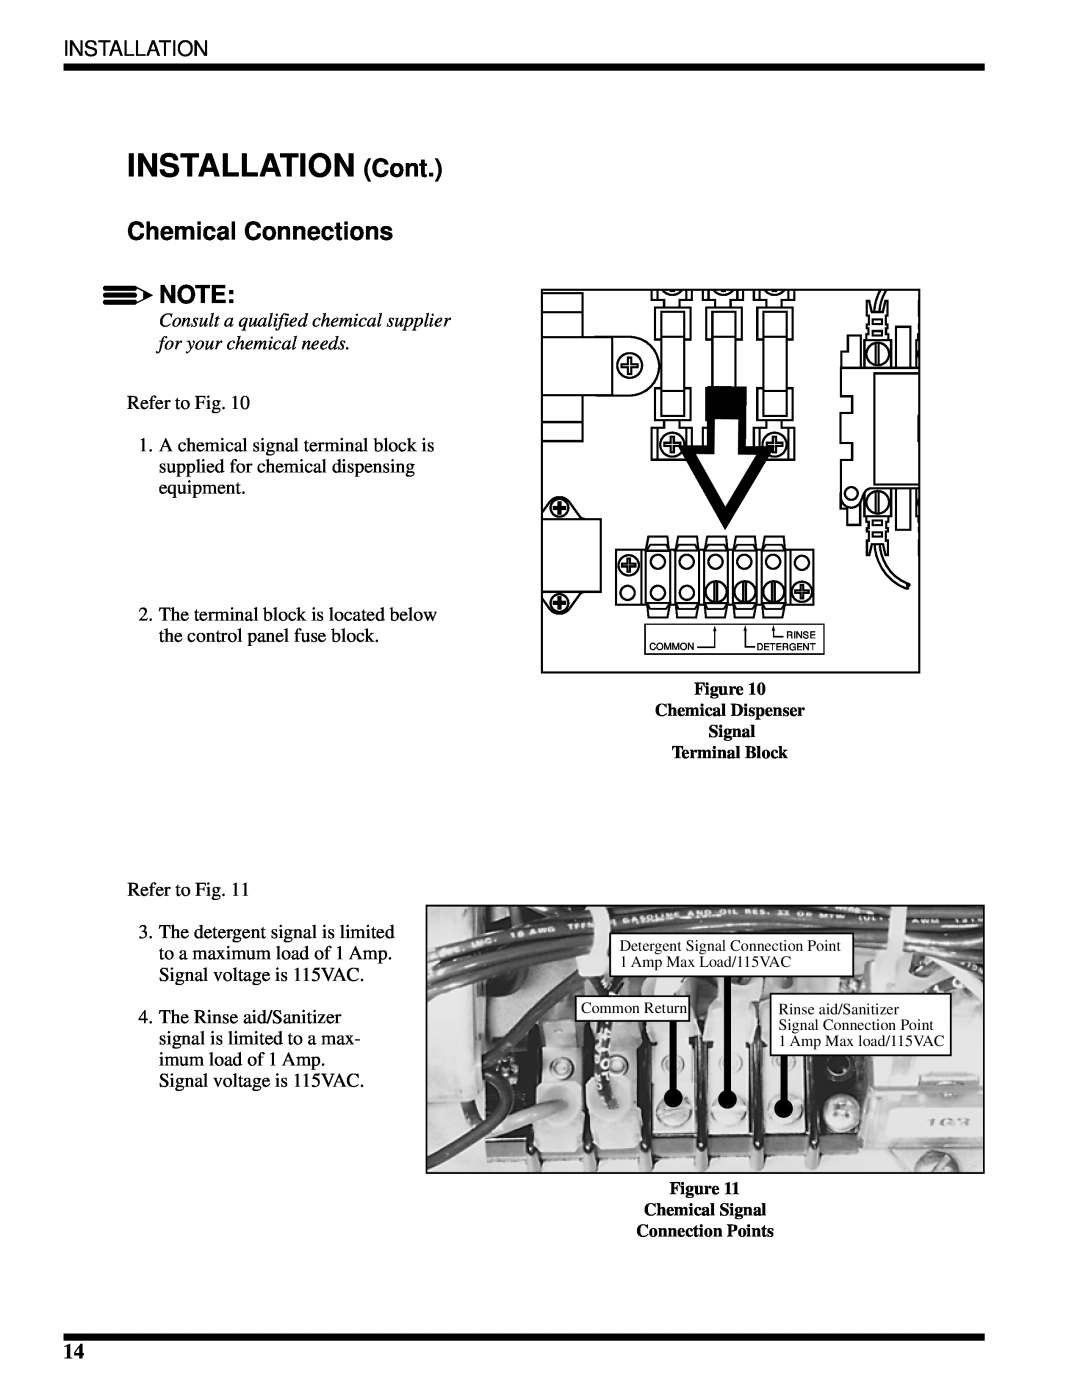 Moyer Diebel MH-6LM3, MH-6NM3, MH-60M3 technical manual Chemical Connections, INSTALLATION Cont, Installation 